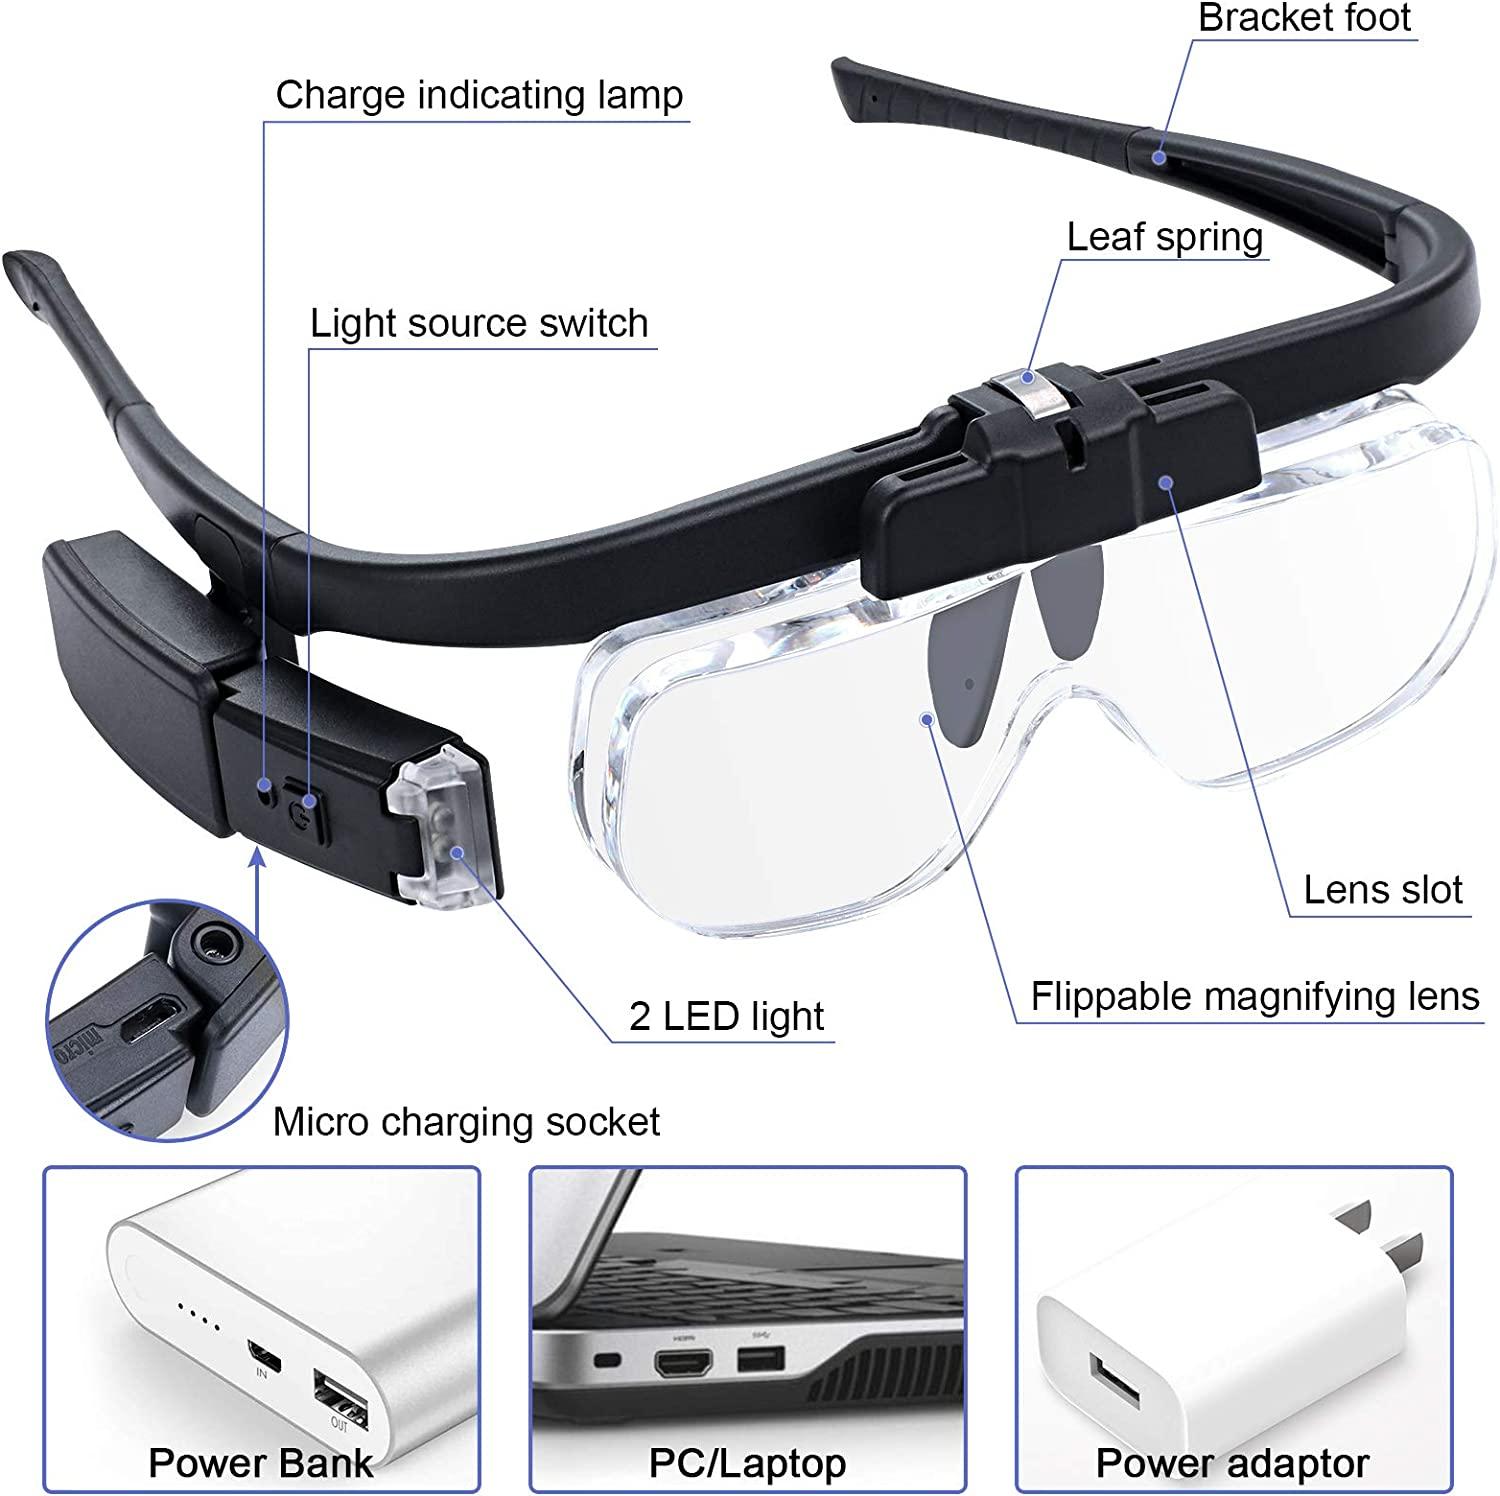 JUOIFIP Headband Magnifying Glasses Rechargeable Magnifier Glasses